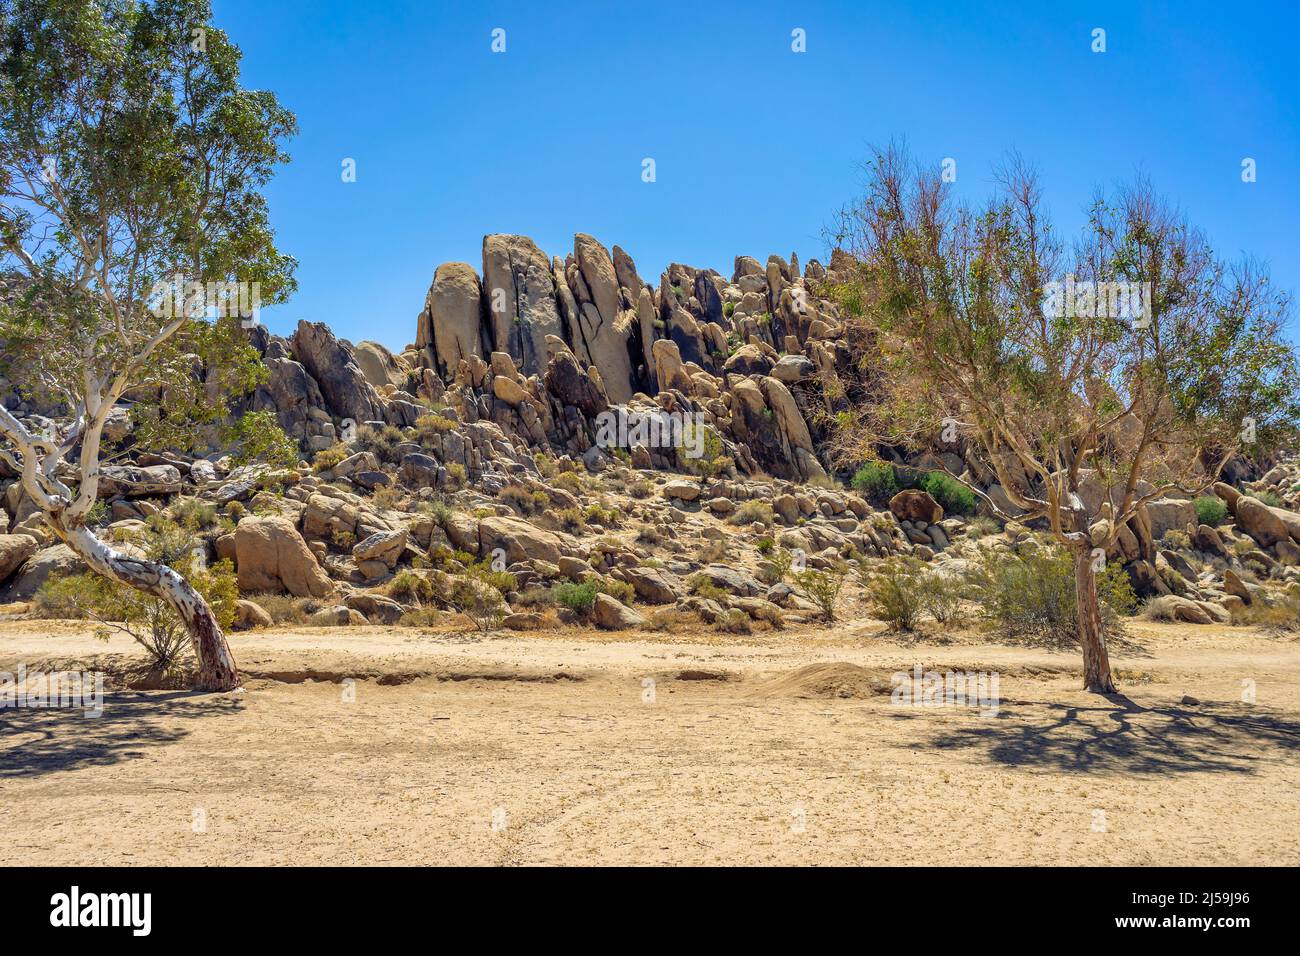 A hill of large rock formation at Horsemen's Center Park in the Mojave Desert Town of Apple Valley, CA. Stock Photo